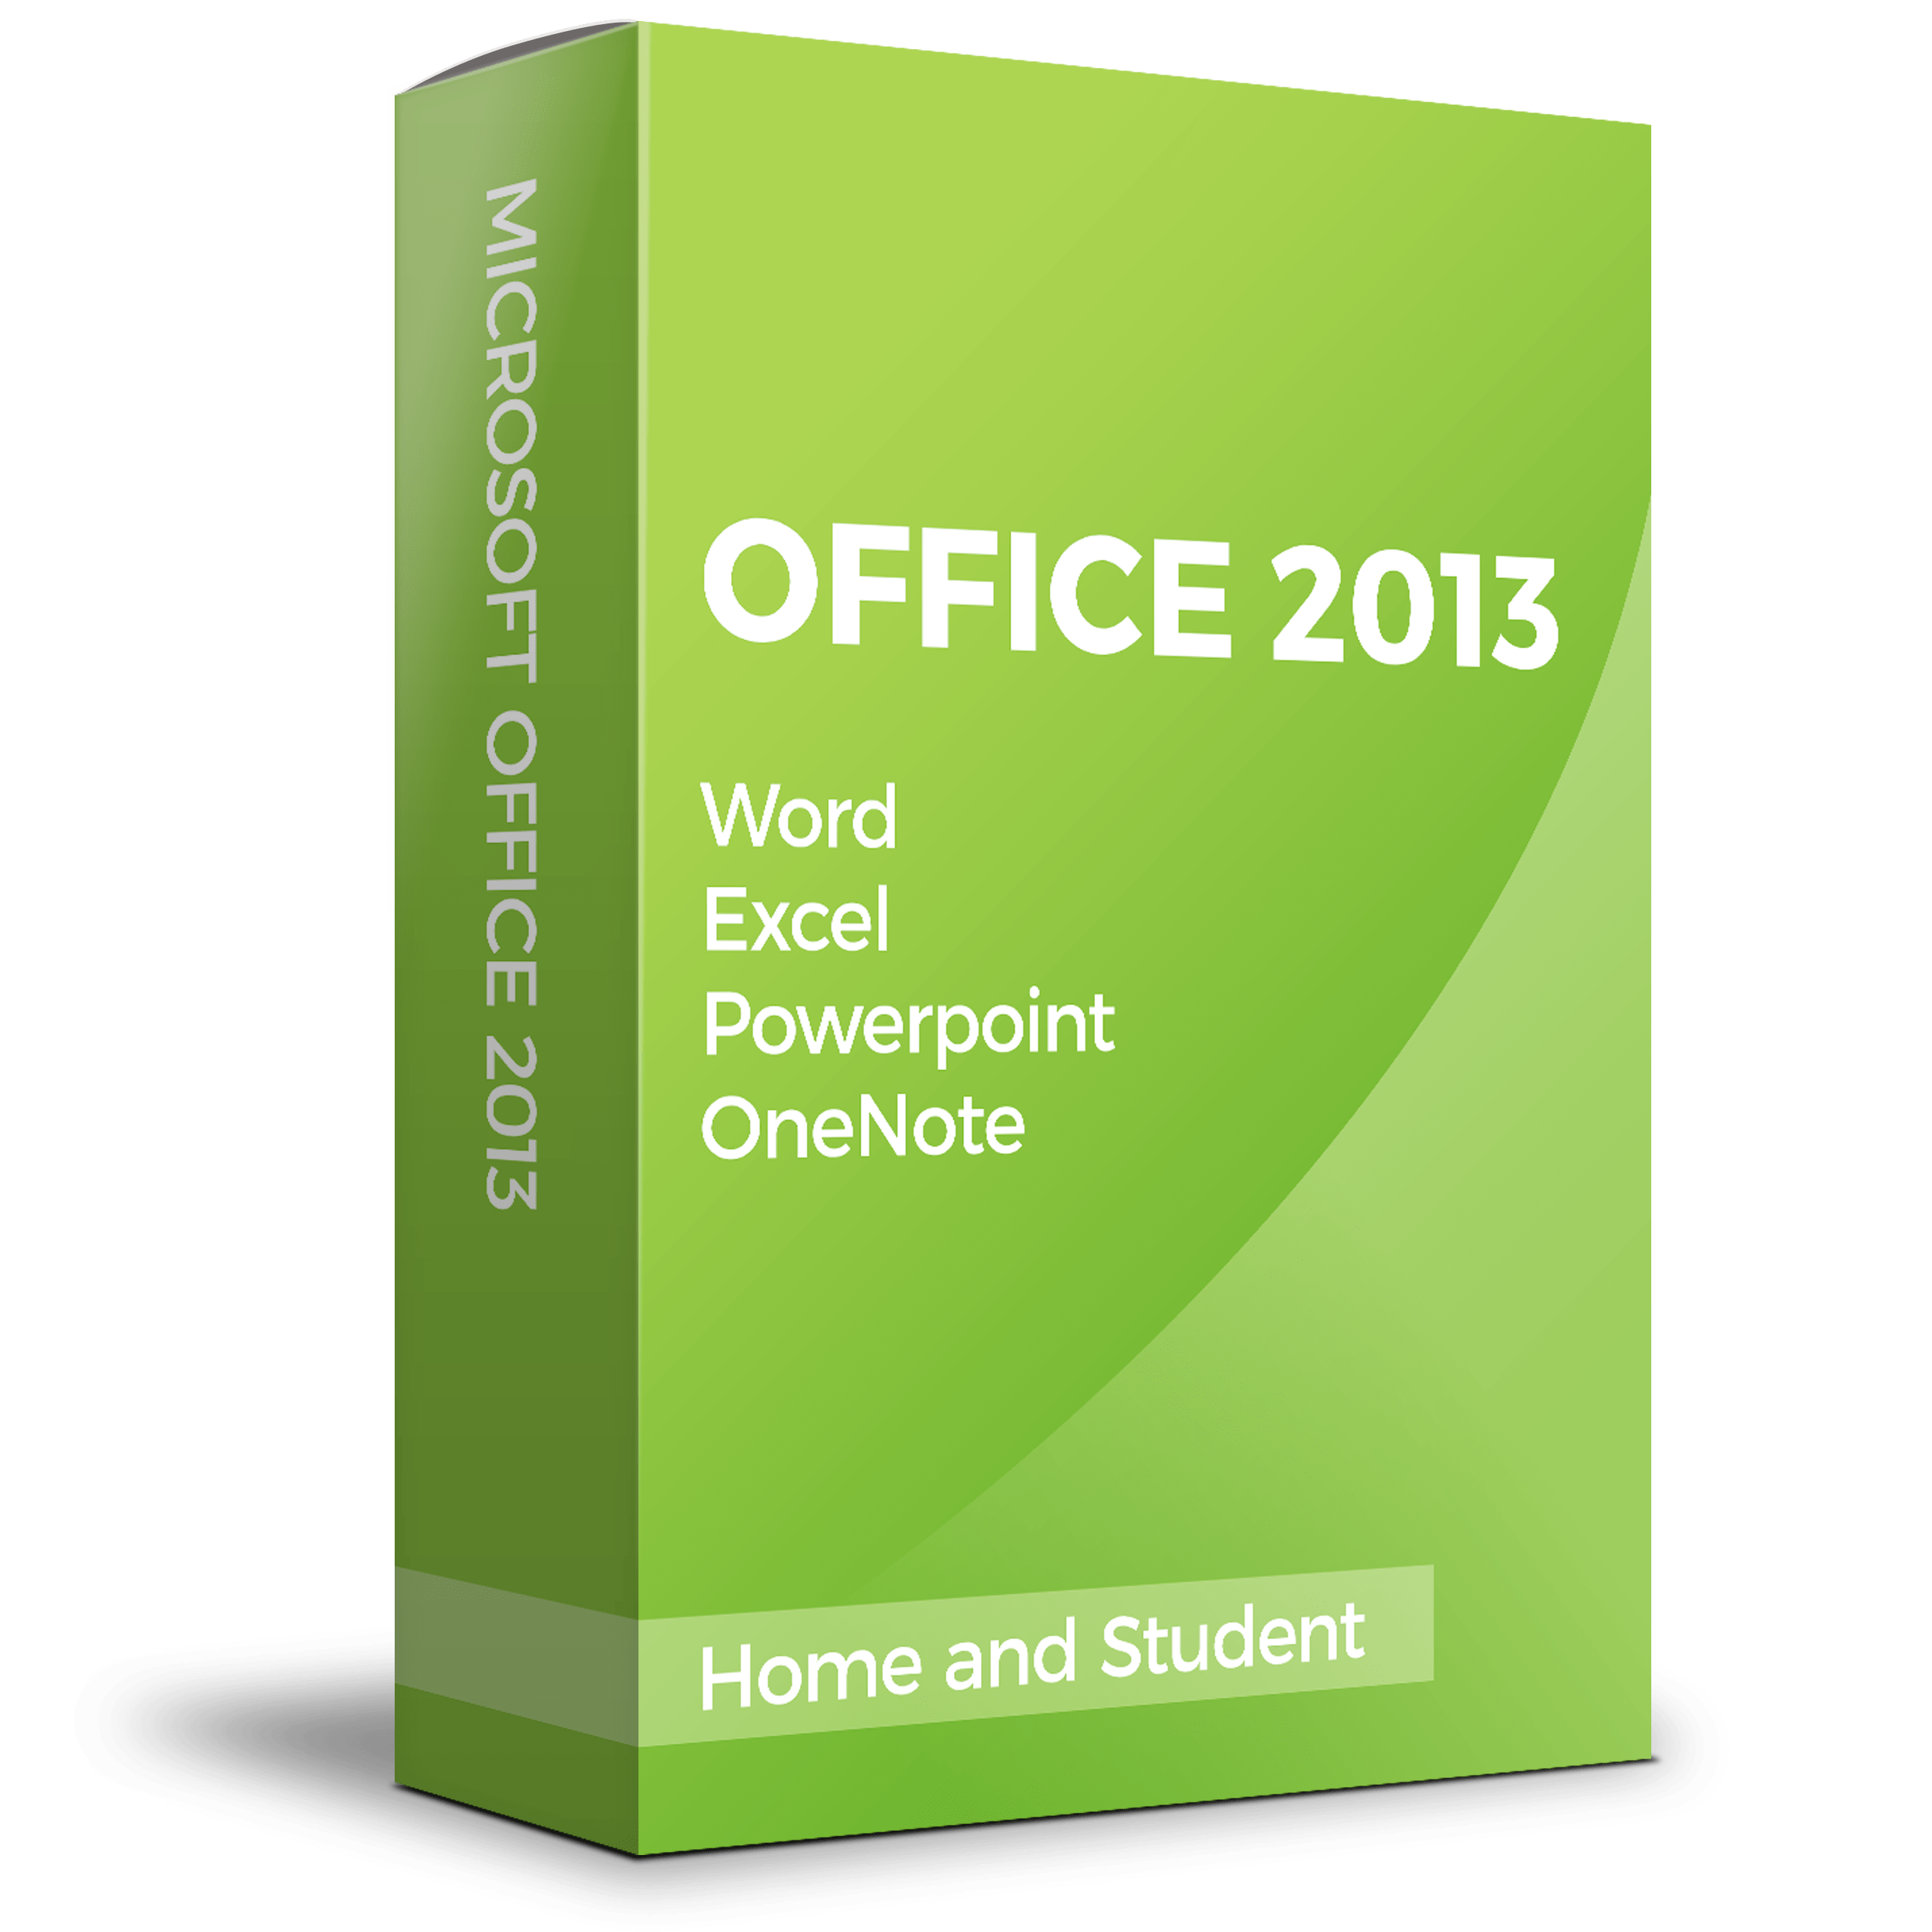 Русский пакет для office. Office 2013 Home and Business. Microsoft Office 2013 professional. Microsoft Office 2013 professional Plus. Office 2013 Home and student.